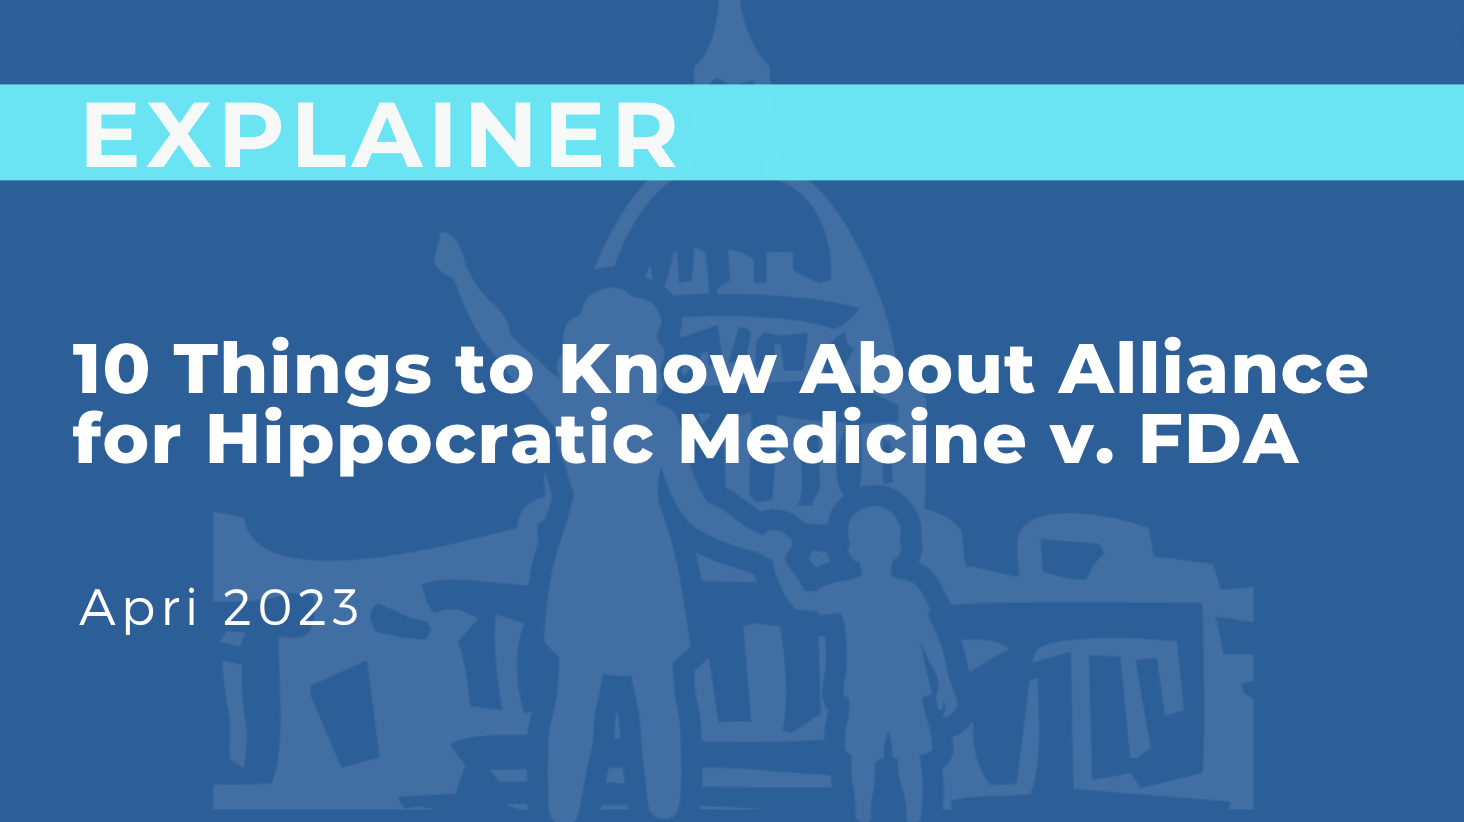 10 Things to know about Alliance for Hippocratic Medicine v. FDA